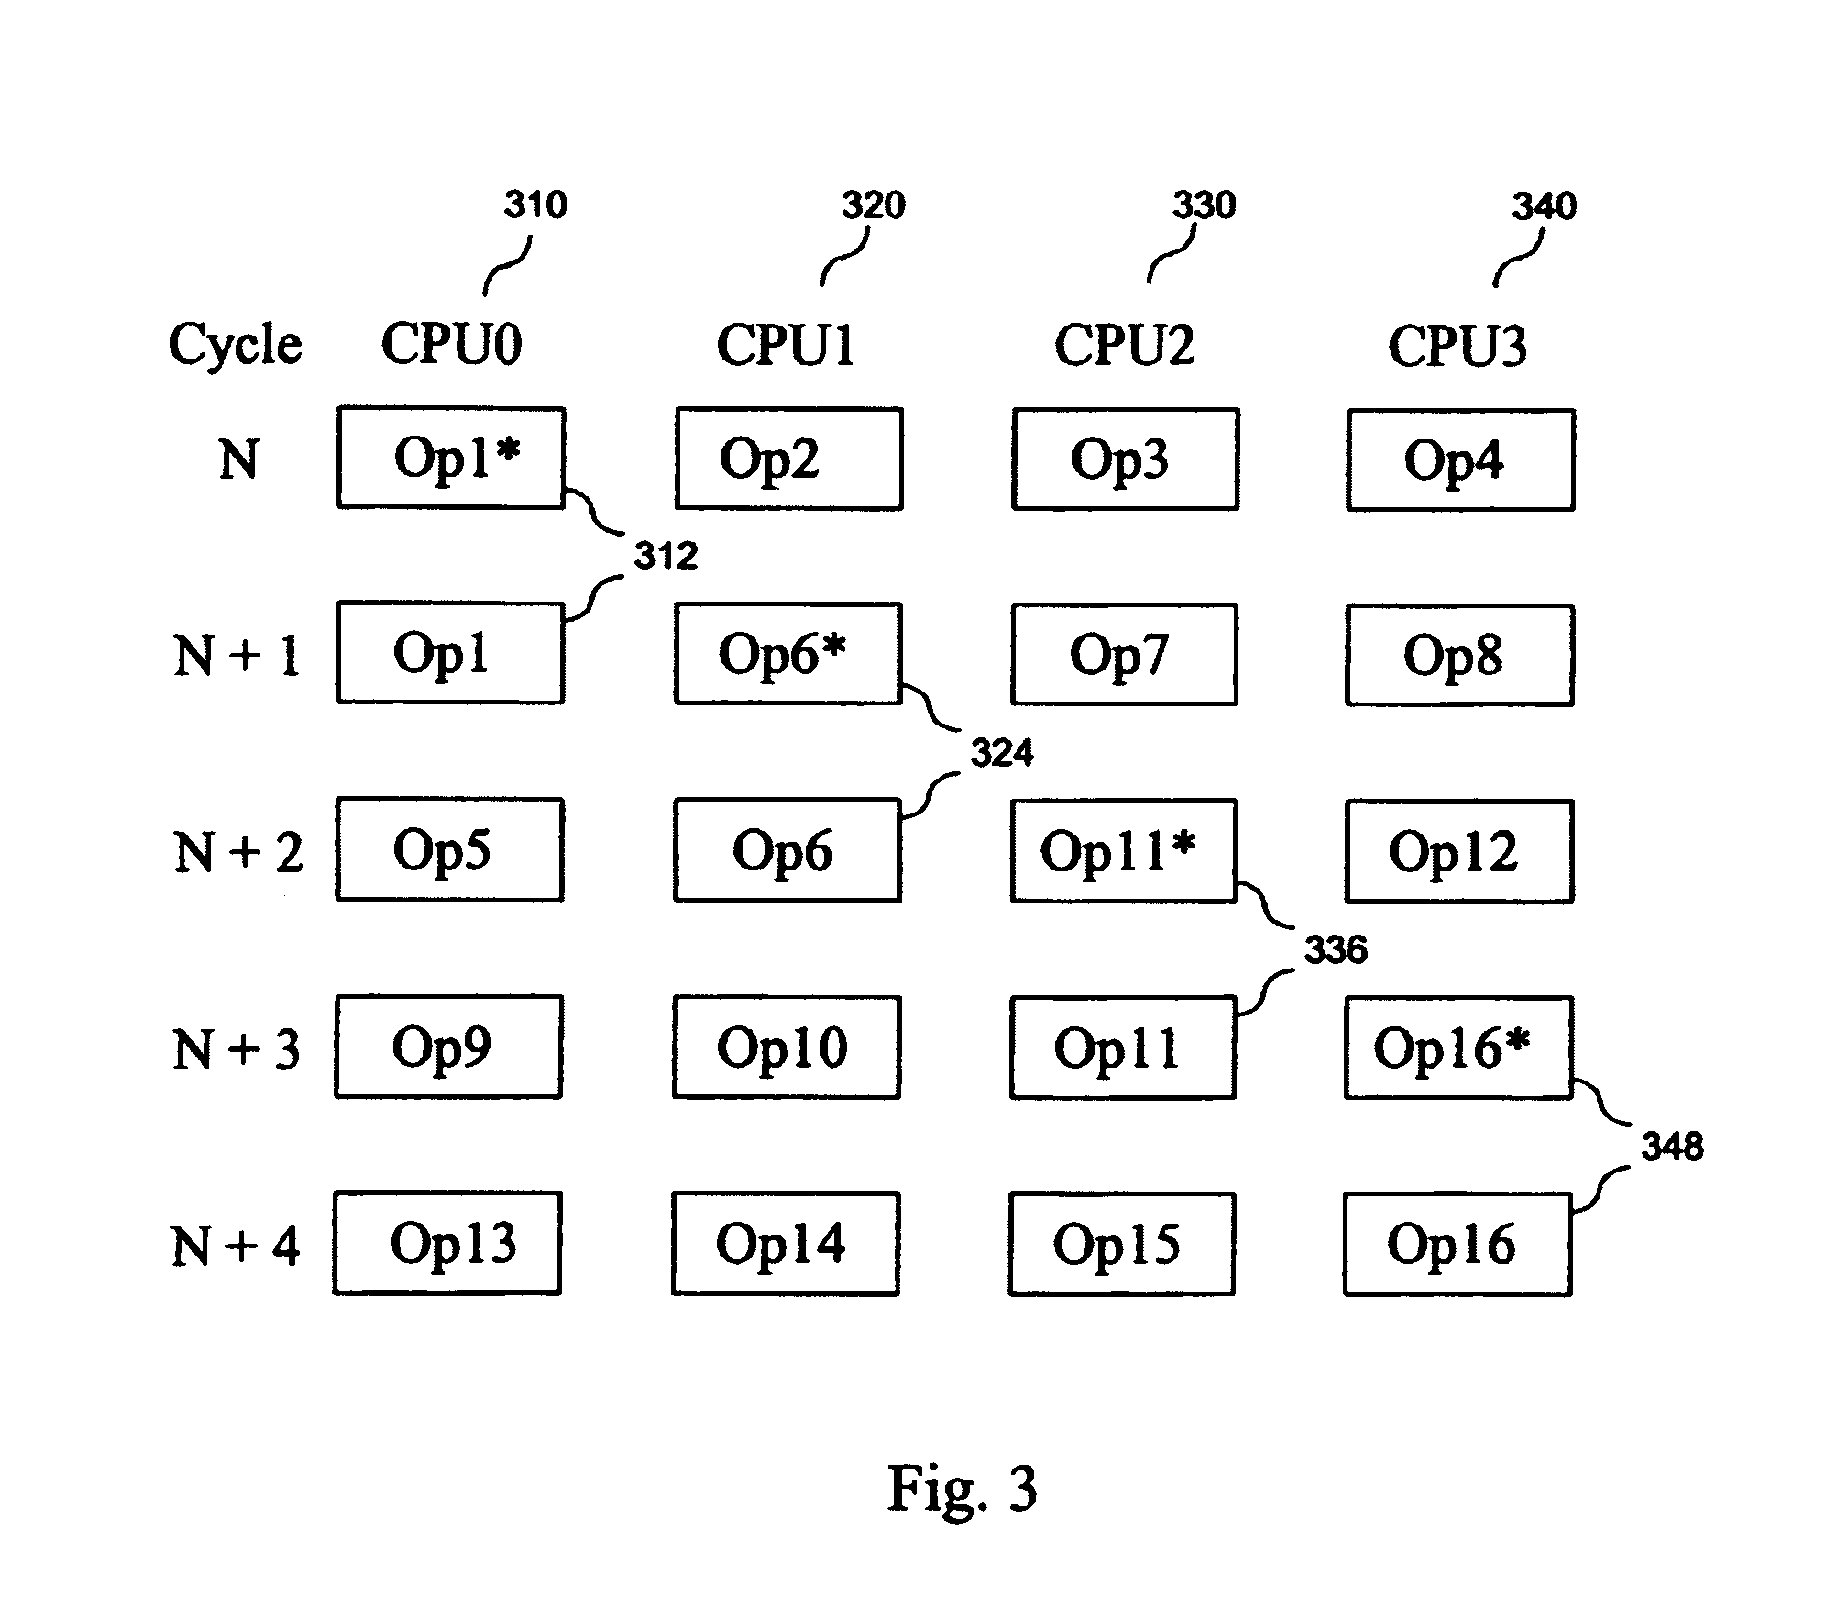 Single-chip multiprocessor with cycle-precise program scheduling of parallel execution